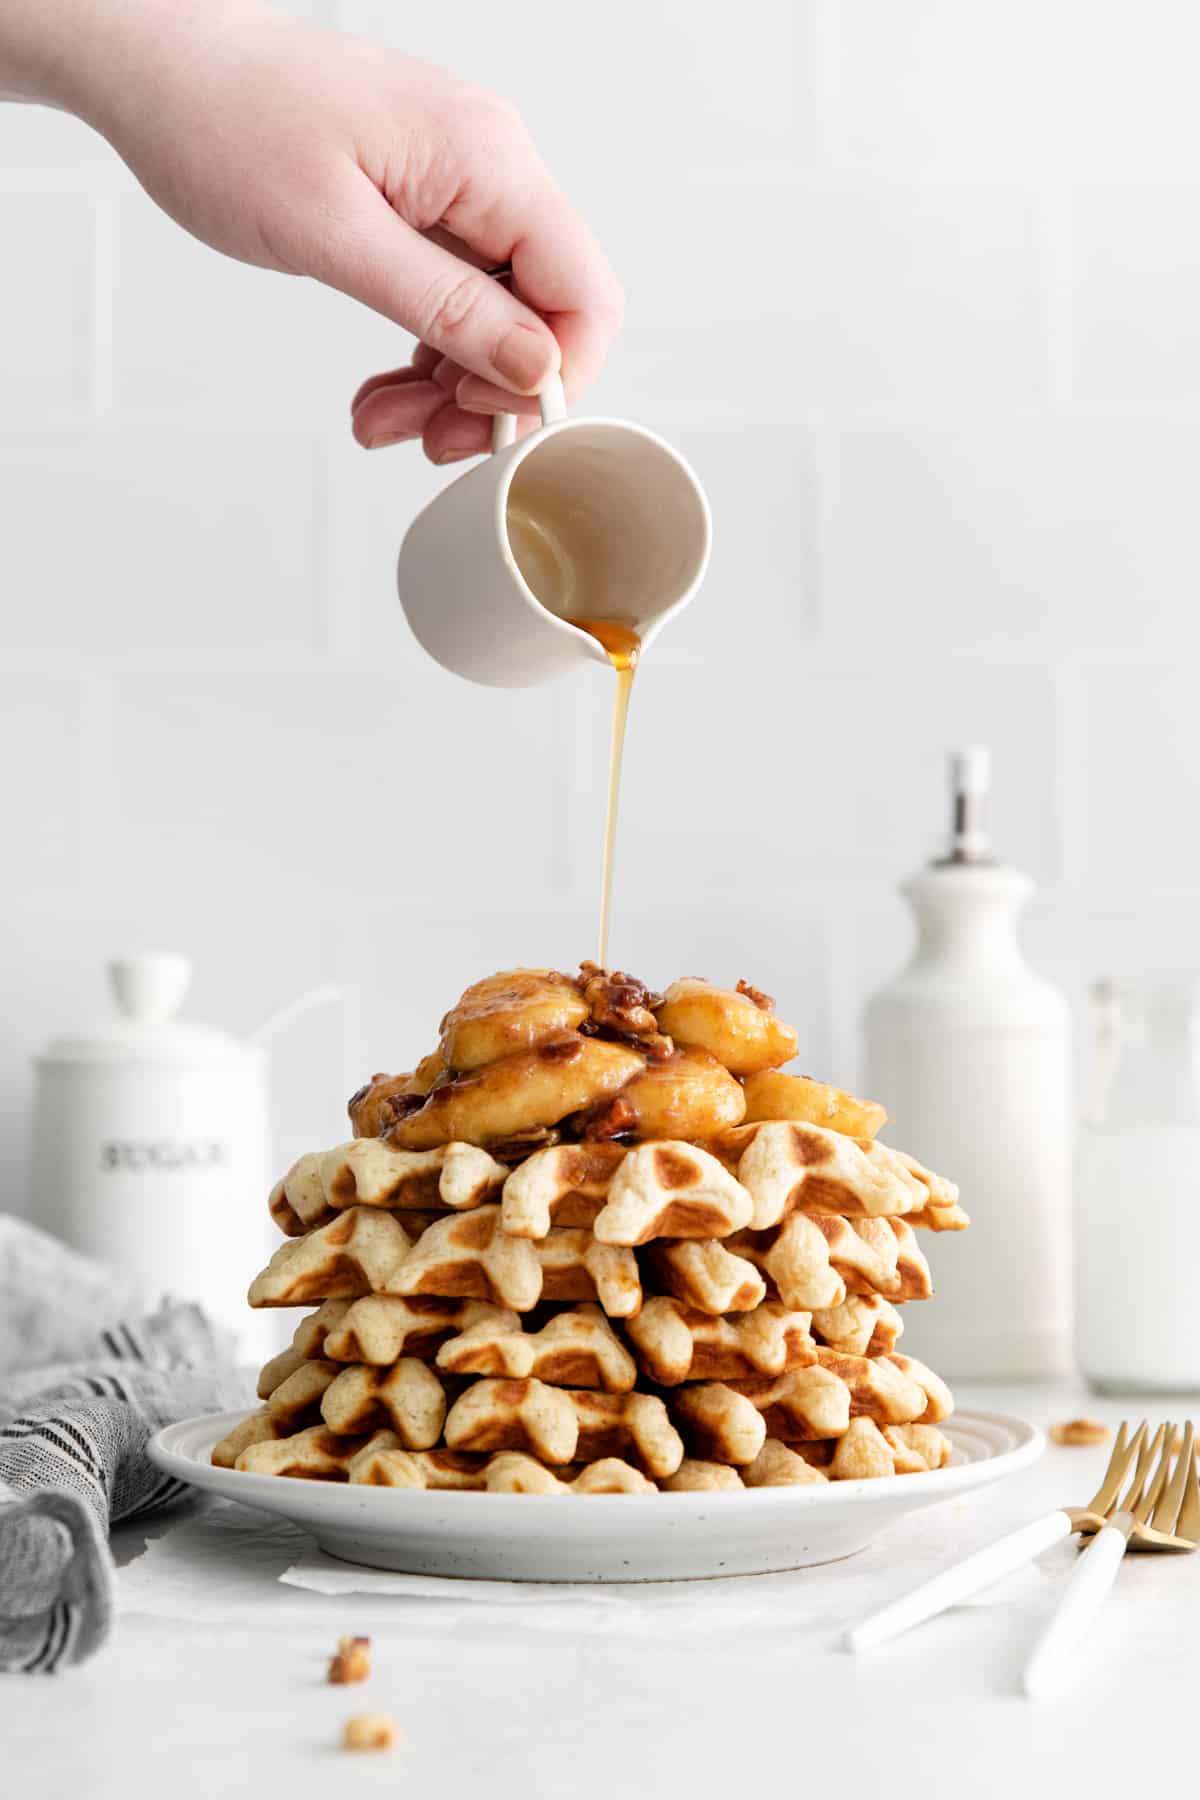 pouring syrup over a stack of waffles